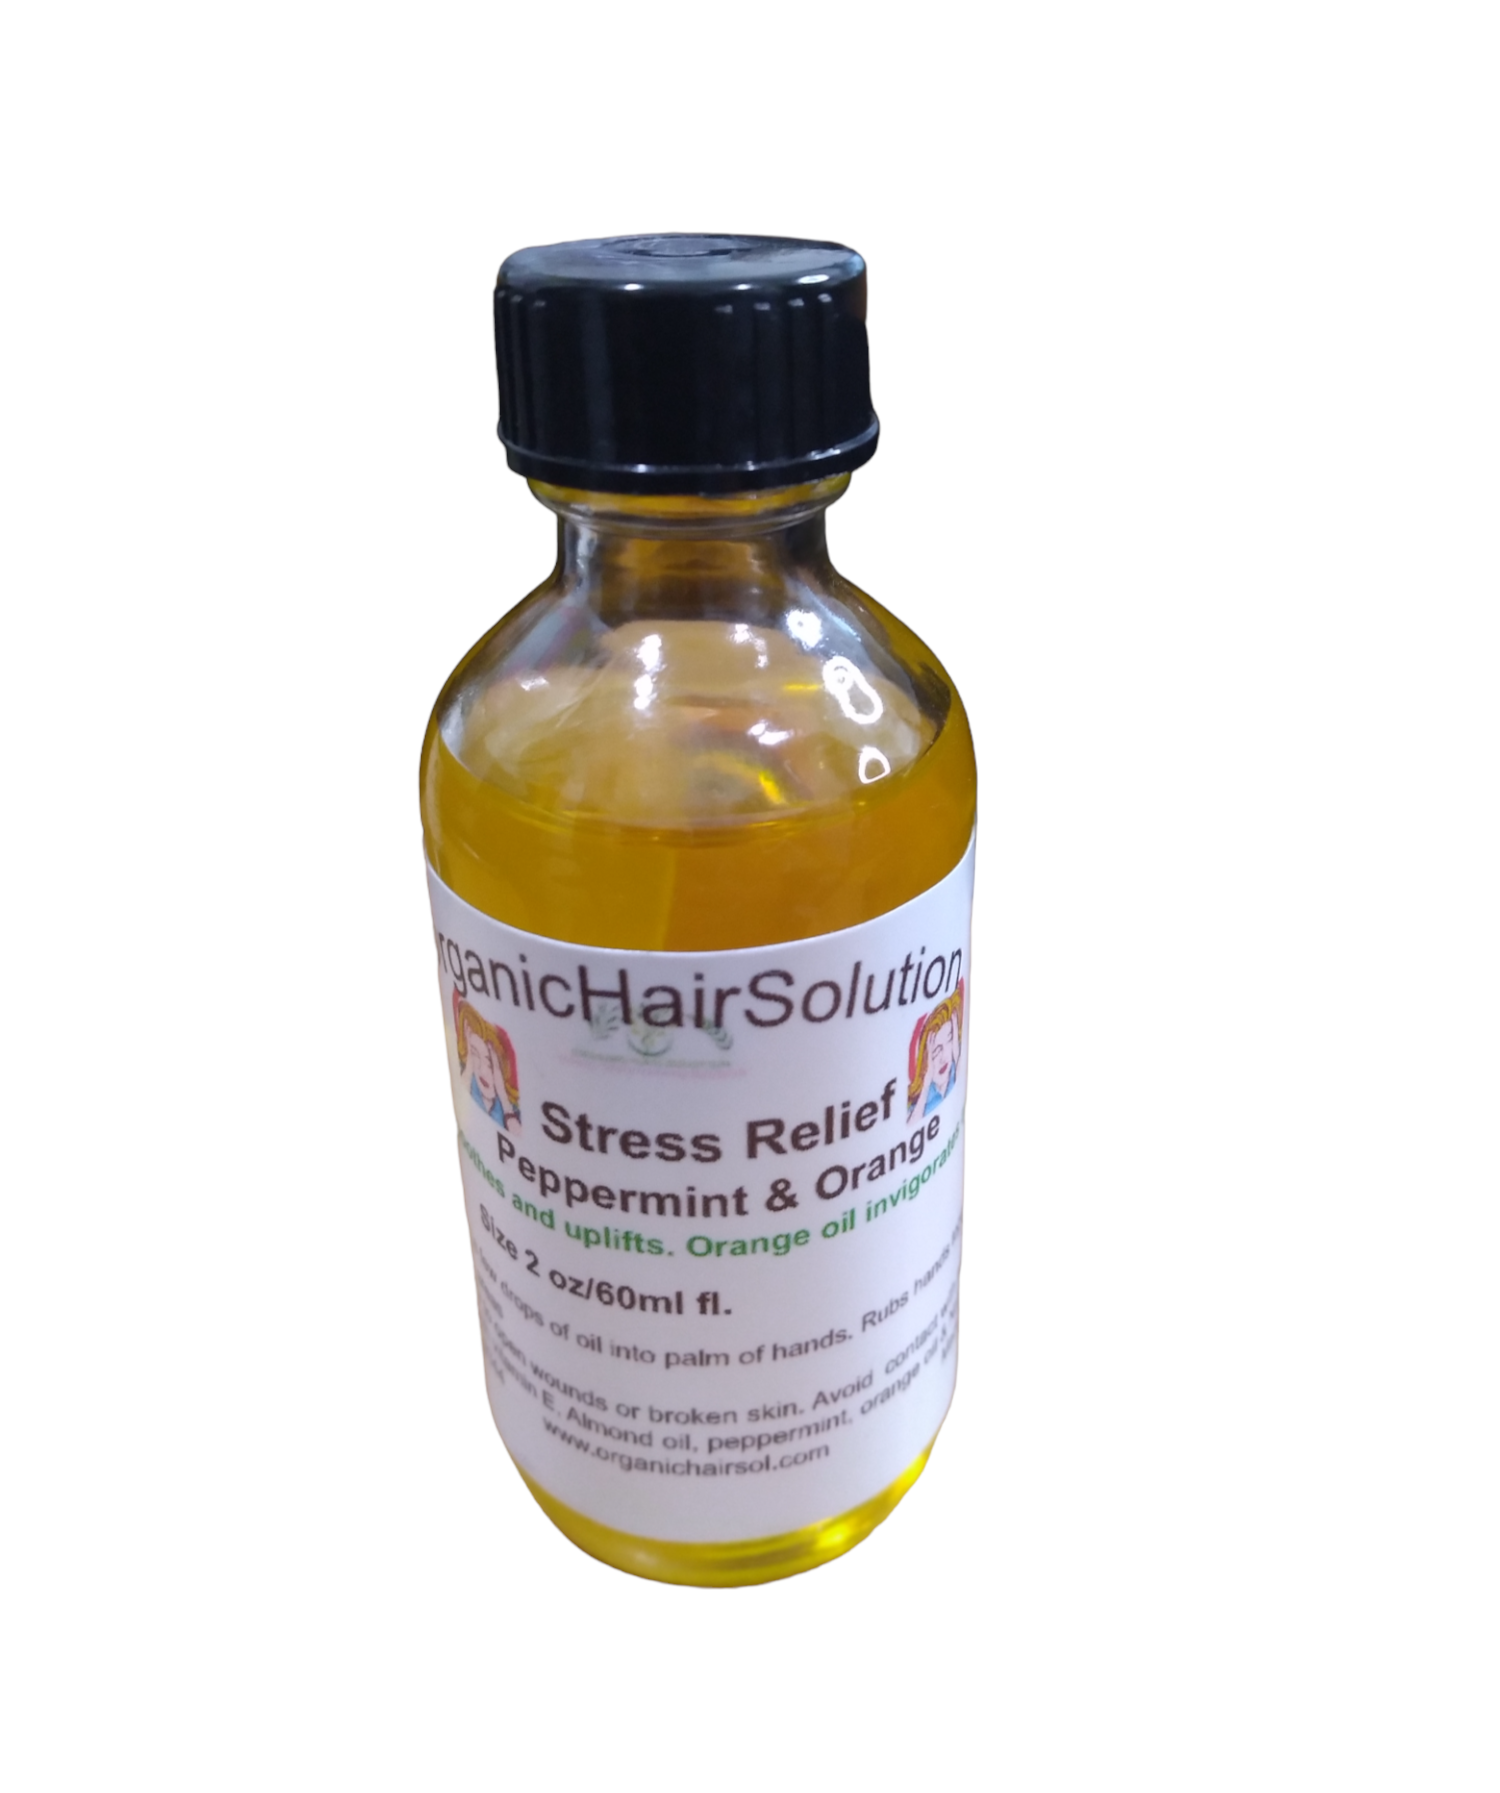 STRESS RELIEF- With peppermint & Orange - Organic Hair Solution, LLC